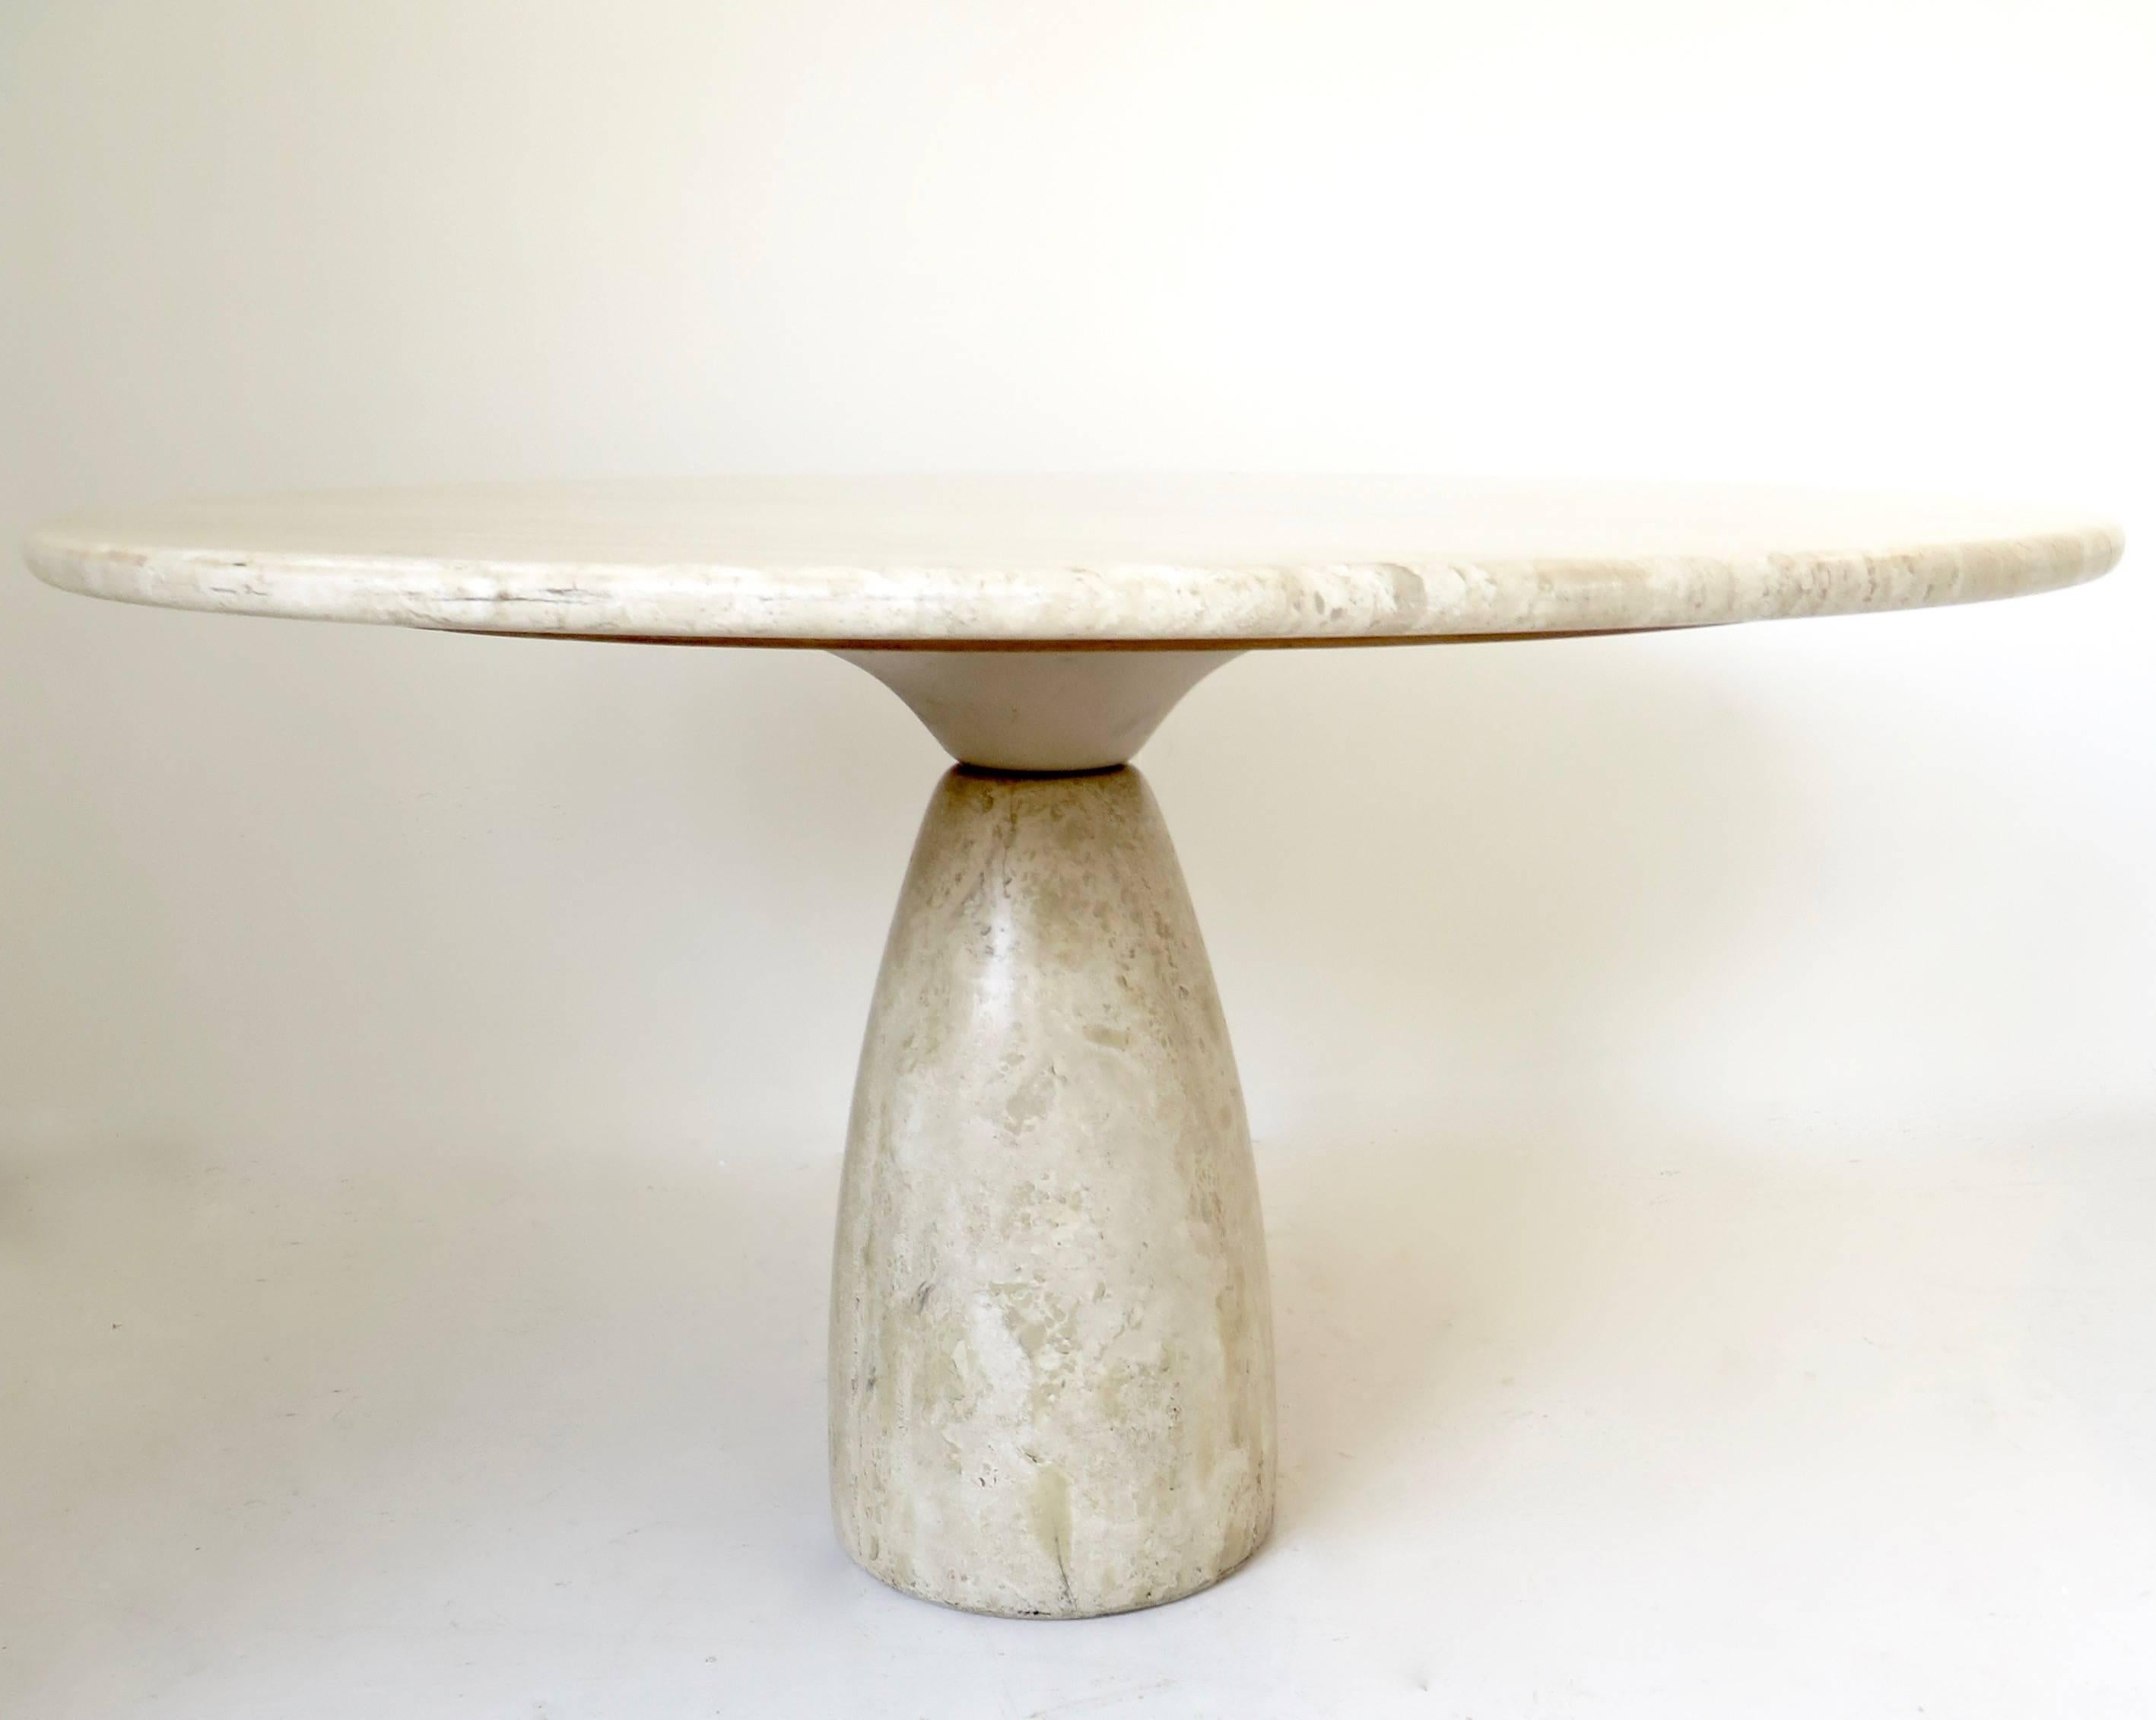 A round 51" diameter top travertine dining or centre table by German designer Peter Draenert.
The pale beige travertine top rests on a tear drop shaped pedestal that is designed with a lacquered metal inverted form that is then pinned to the